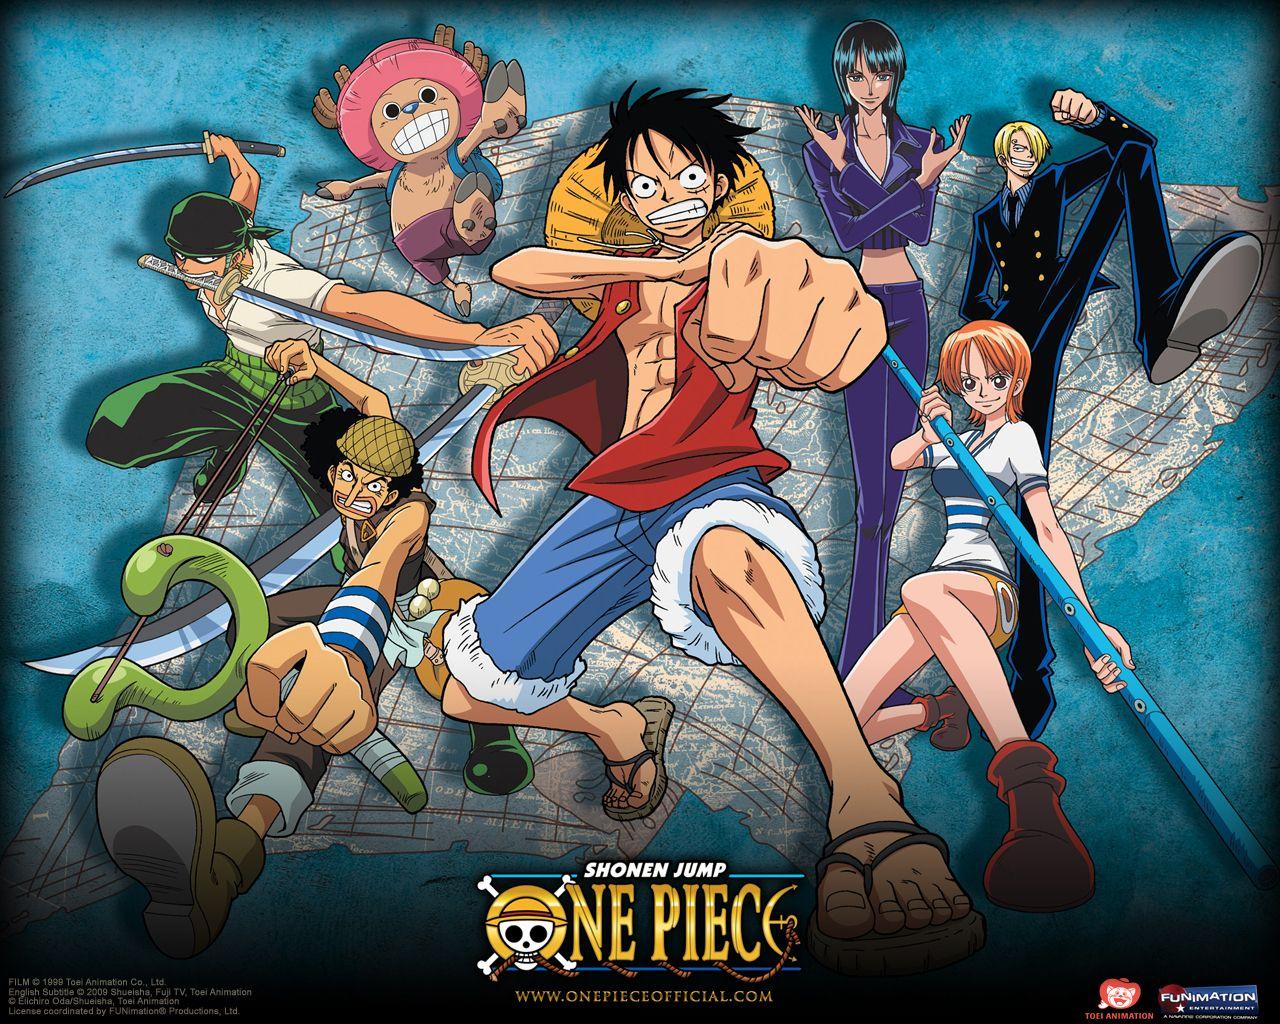 Awesome one piece HD wallpaper for windows 7 About Windows